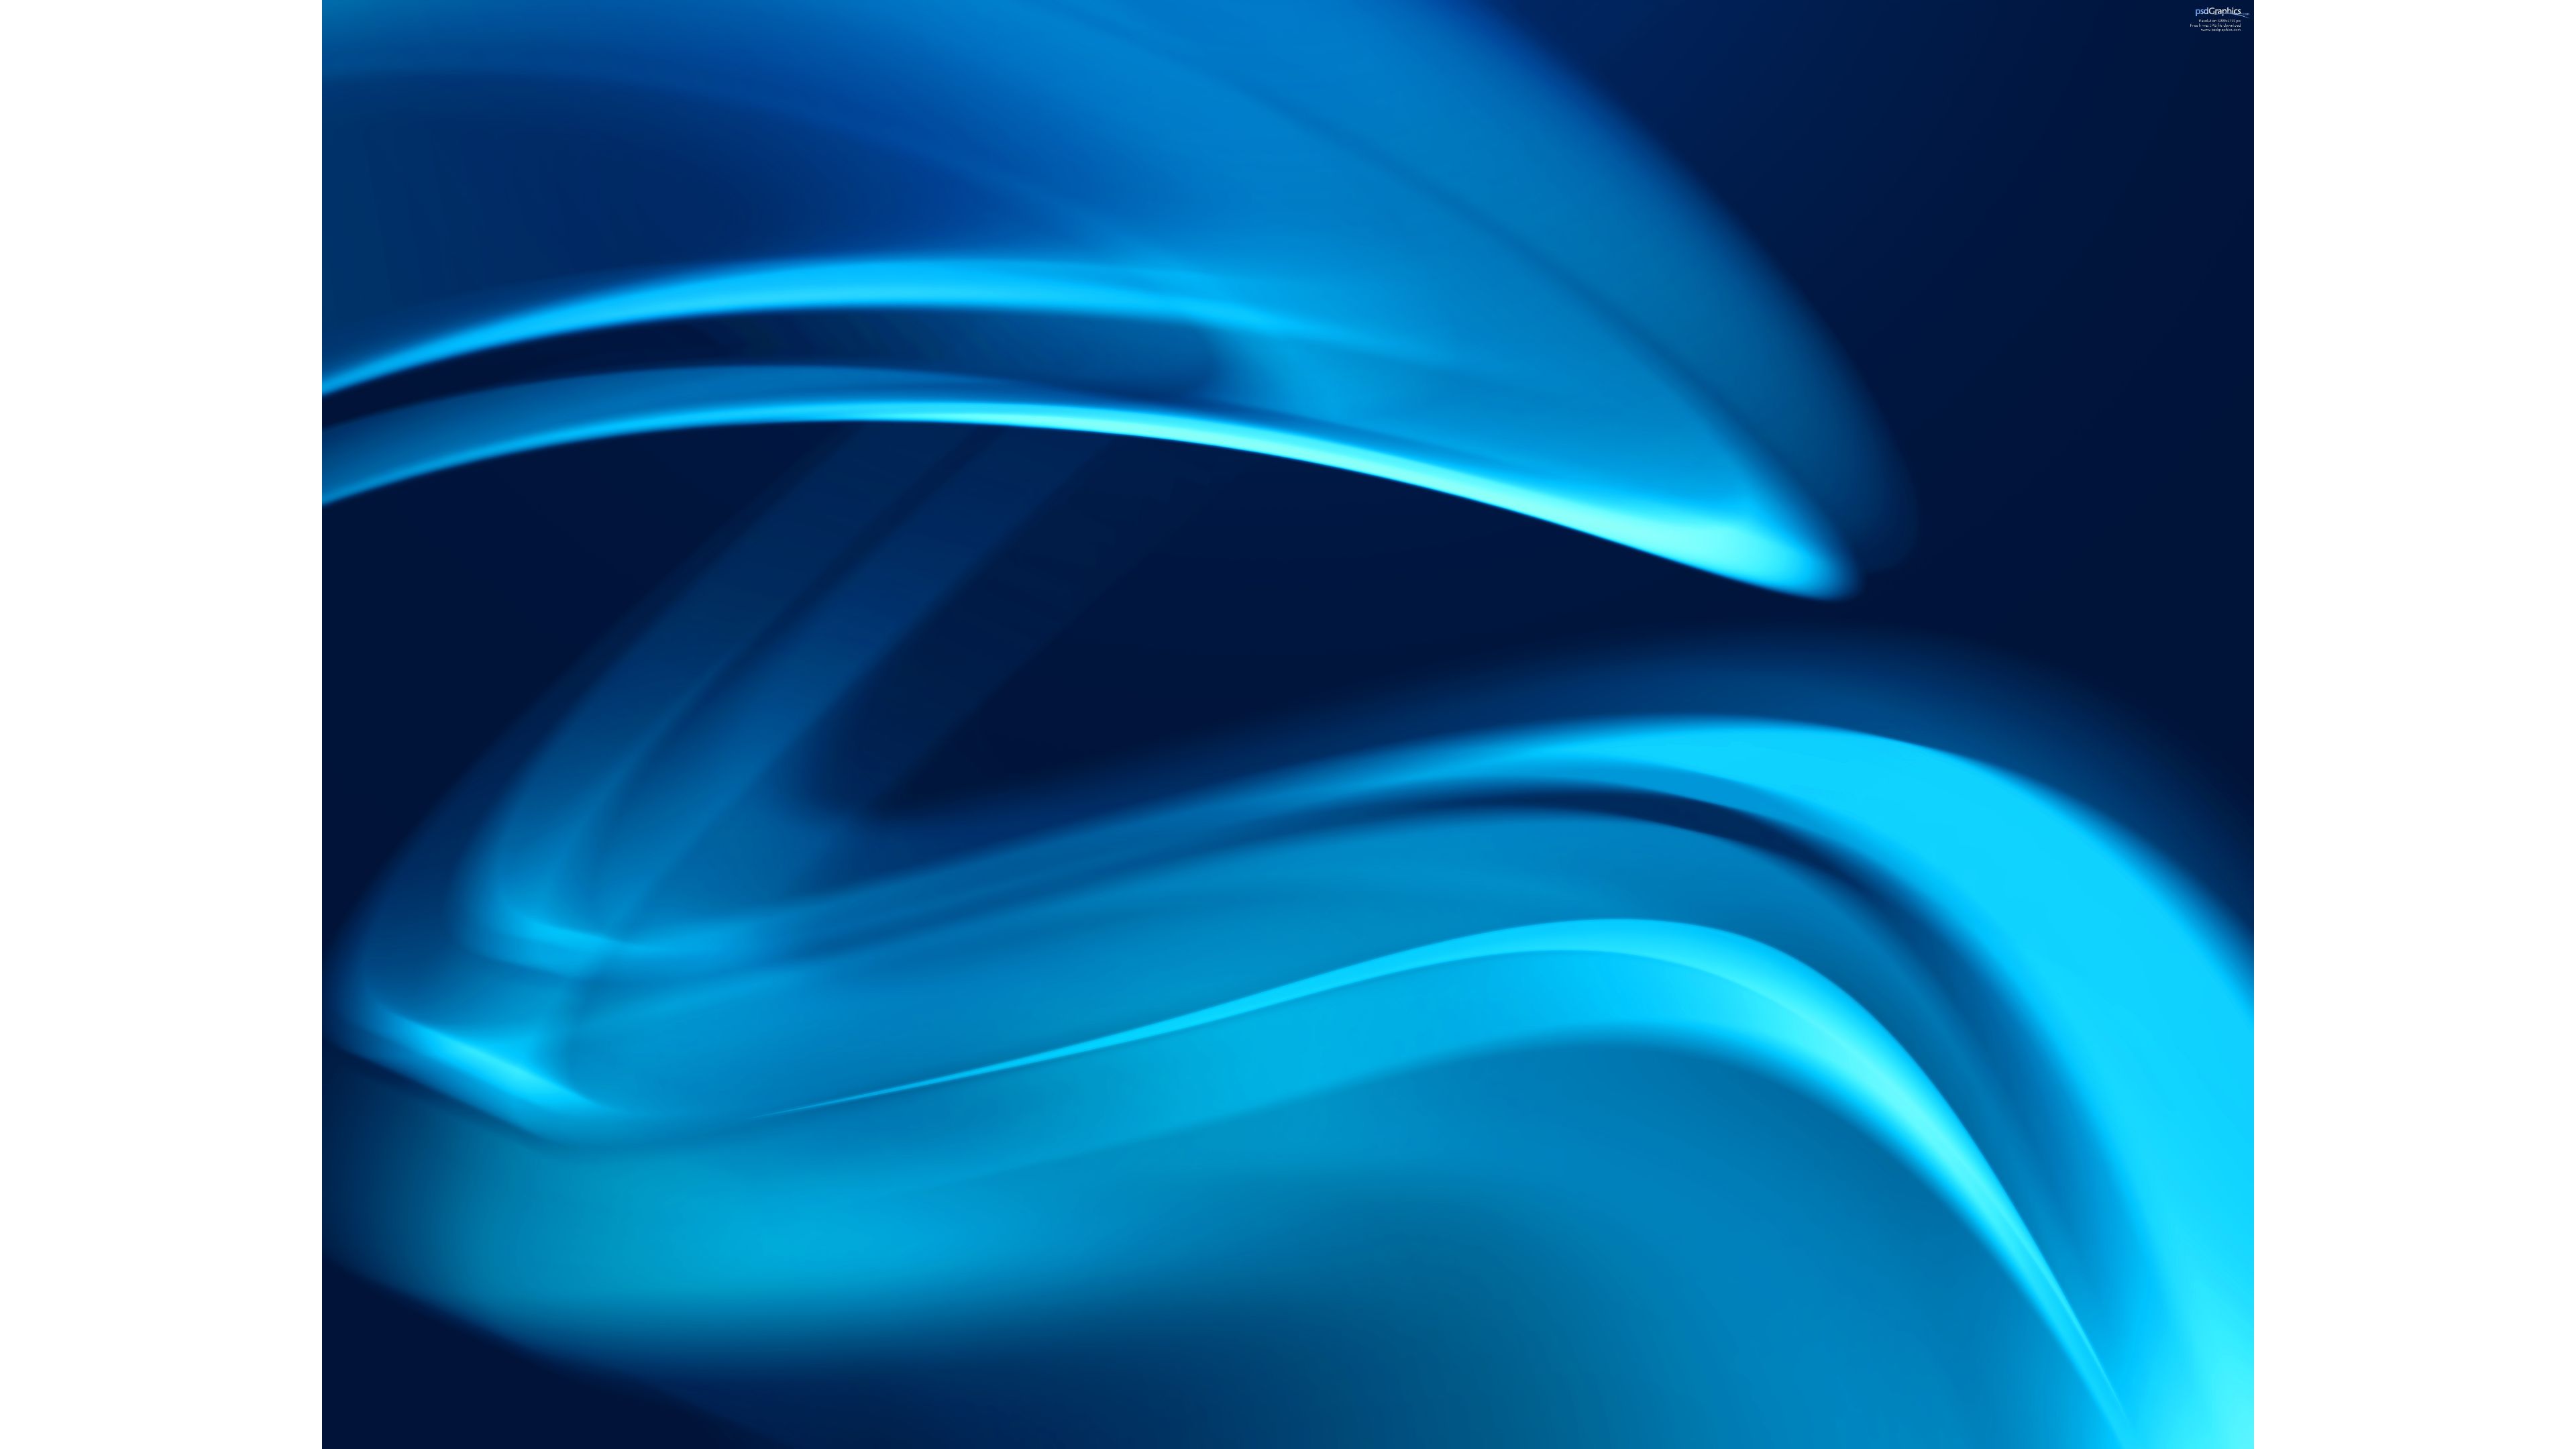 Waves of Blue 4K Abstract Wallpapers | Free 4K Wallpaper